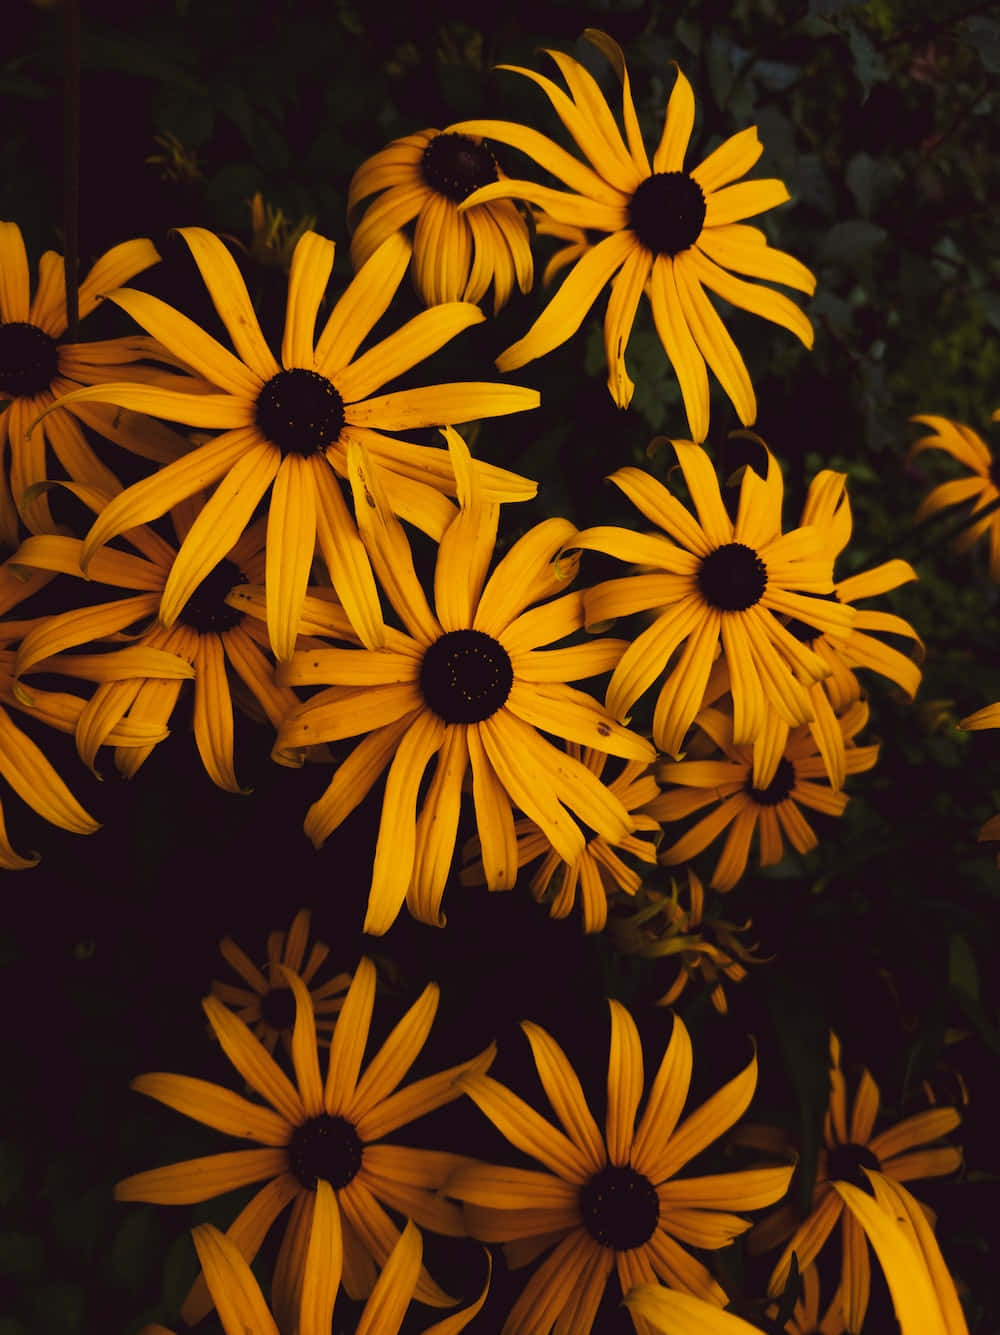 Brighten Up Any Day with Black Eyed Susan Wallpaper